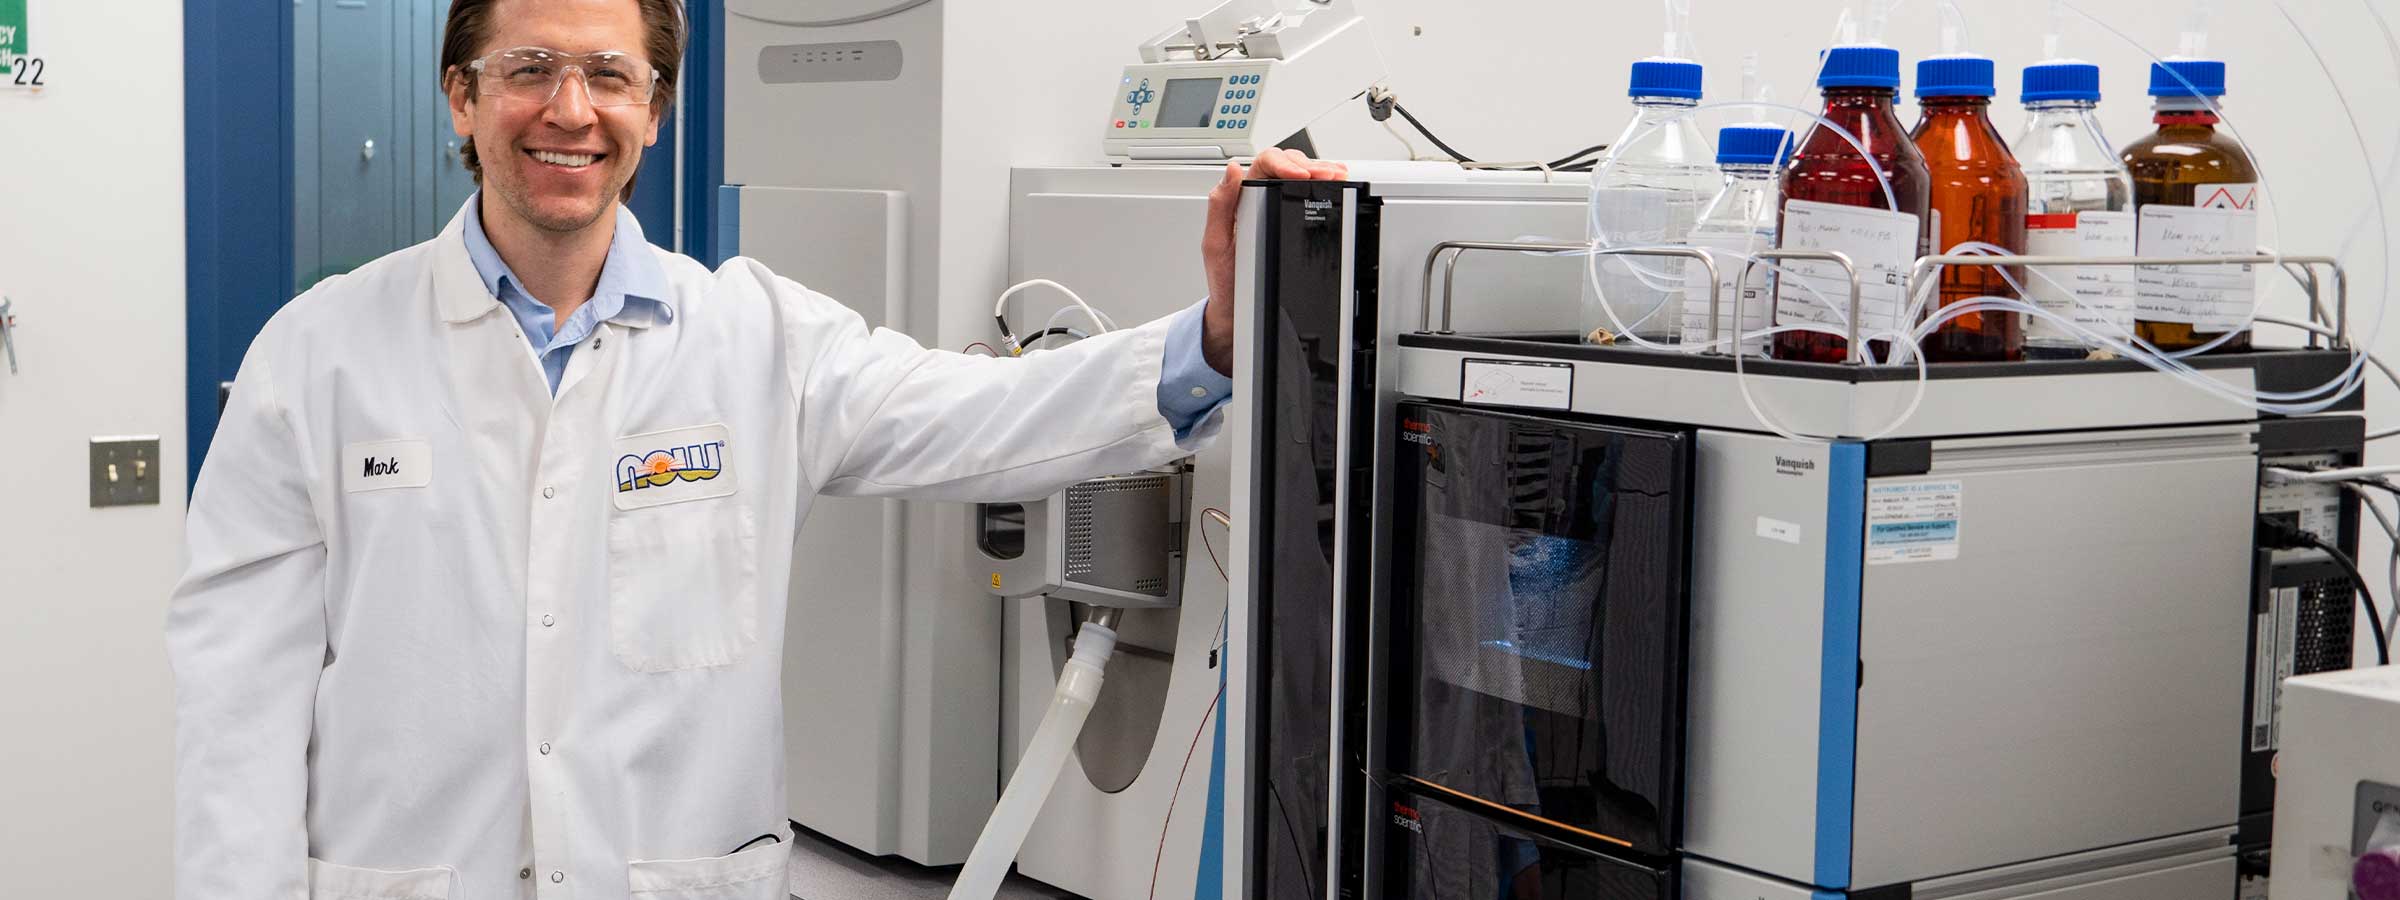 light skin male presenting person standing in a white lab coat next to a machine in a lab setting